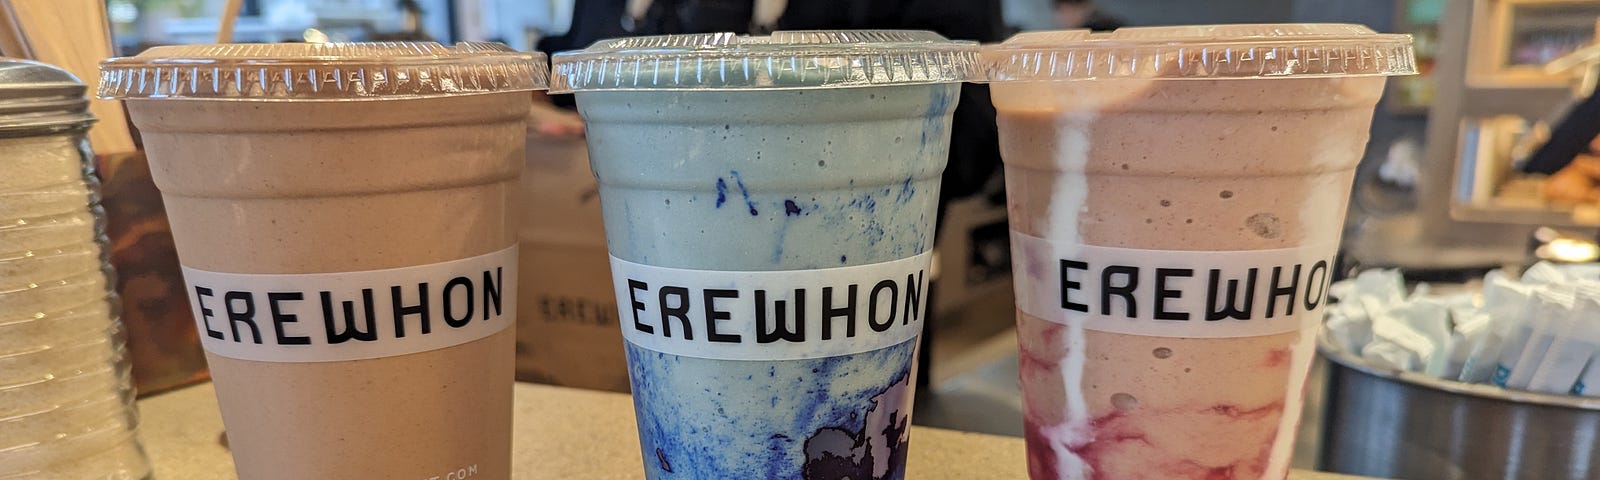 3 of the most popular smoothies at Erewhon: Peanut Butter Blast, Coconut Cloud, and Hailey Bieber’s Strawberry Glaze